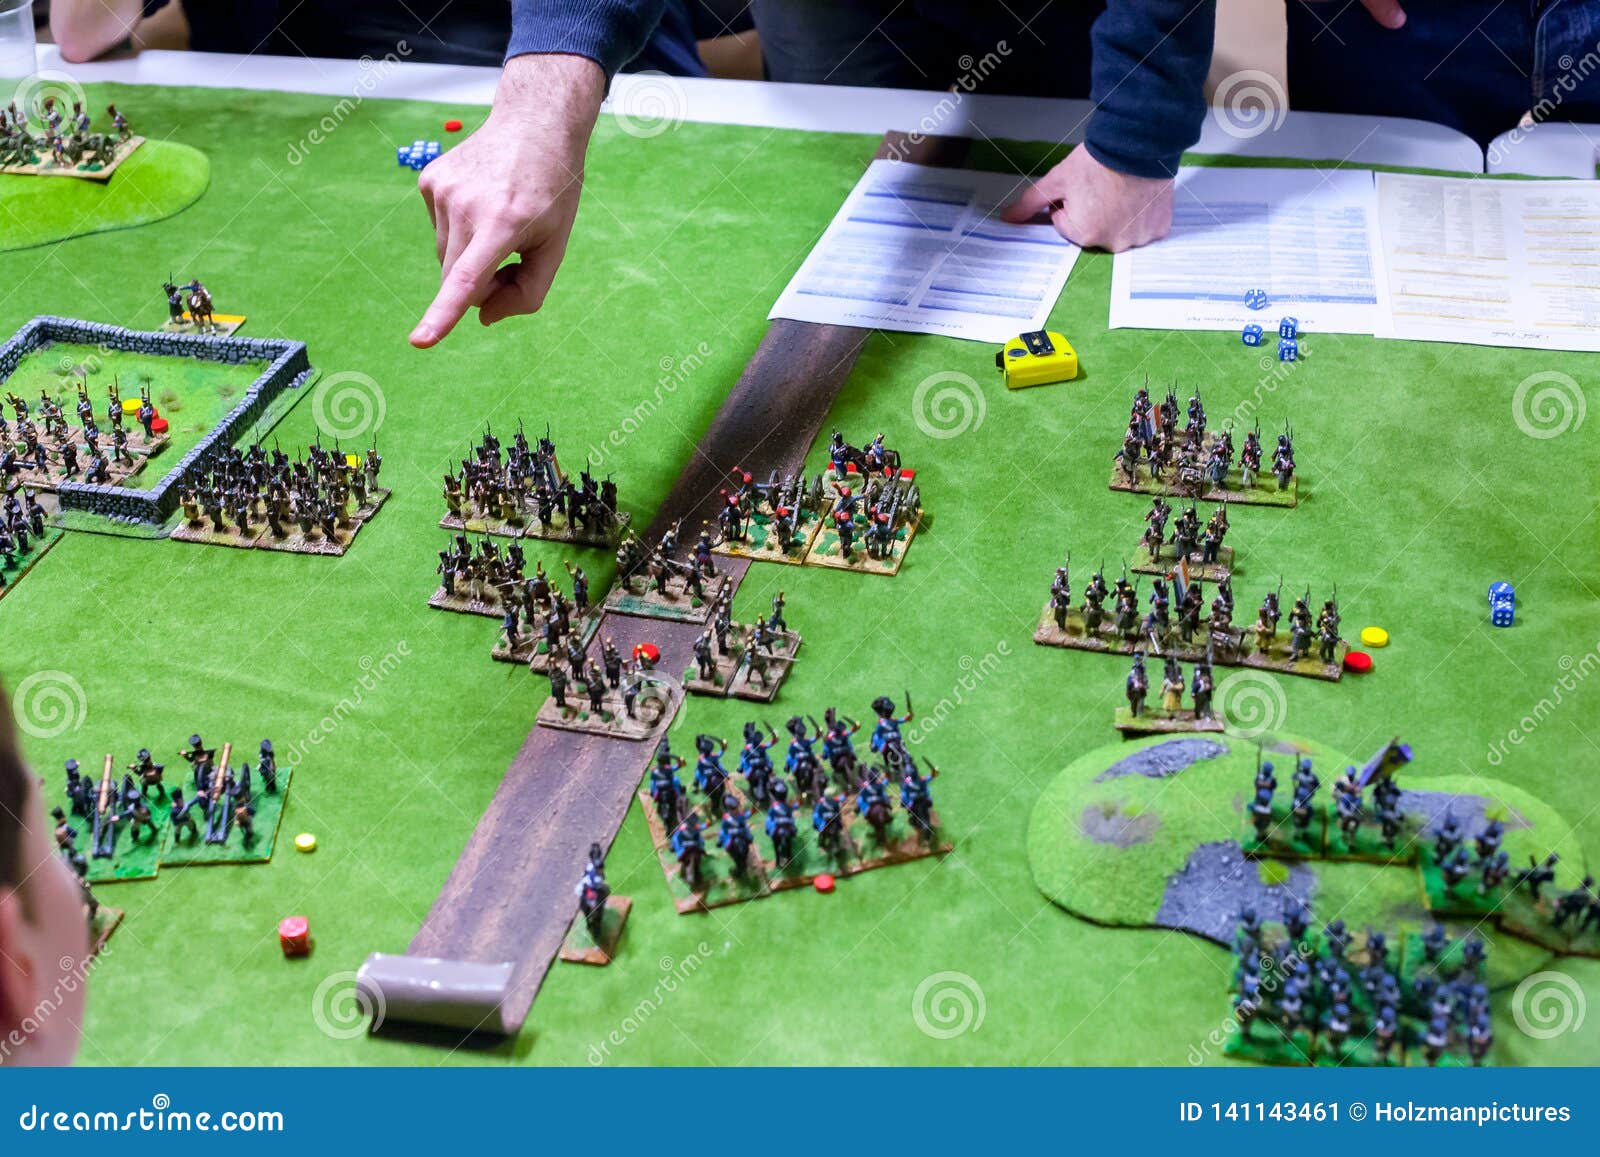 Historical Wargaming On Board The French Vs The Brits Stock Image Image Of Brits Strategy 141143461